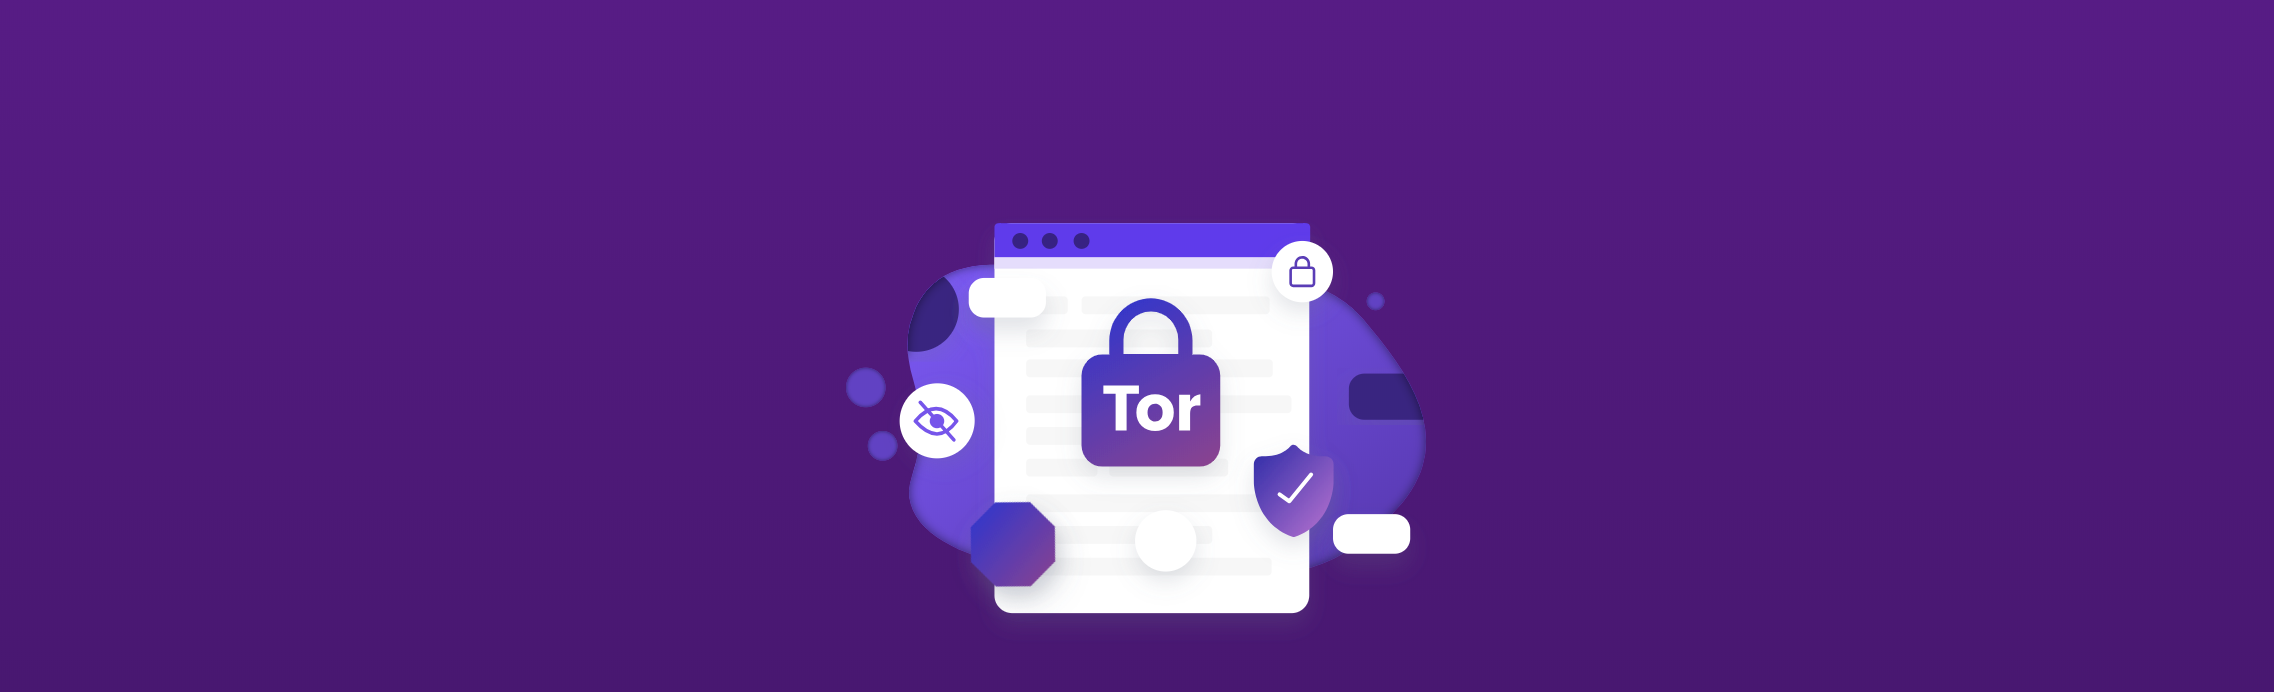 tor browser is not connecting mega